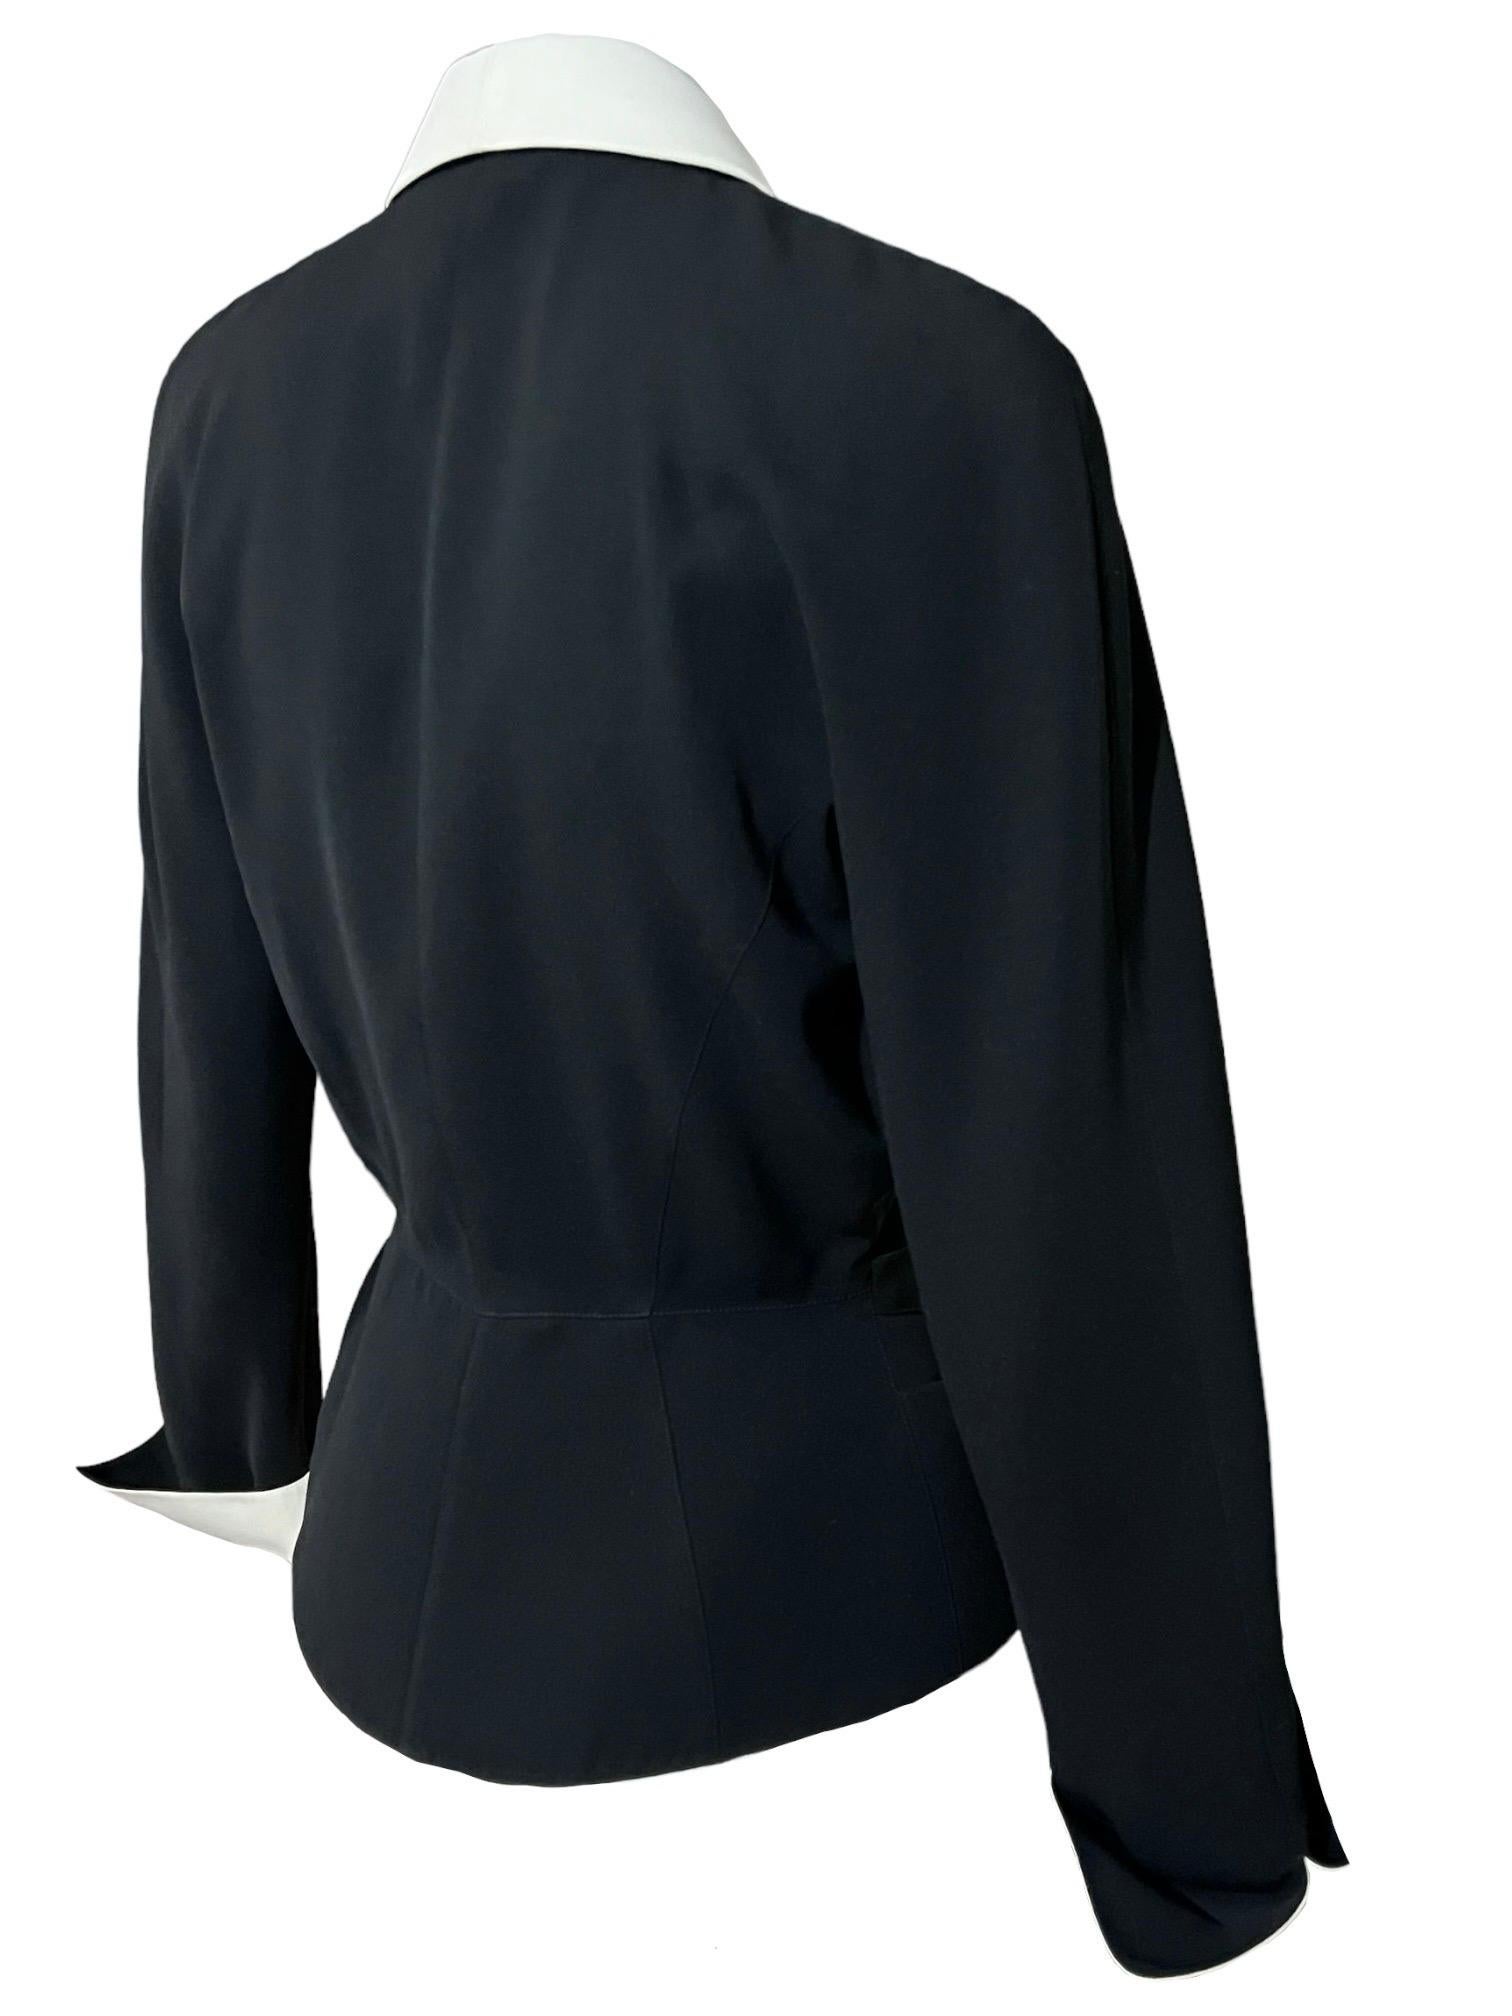 S/S 1992 Thierry Mugler Black Runway Jacket Dramatic White Collar For Sale 2